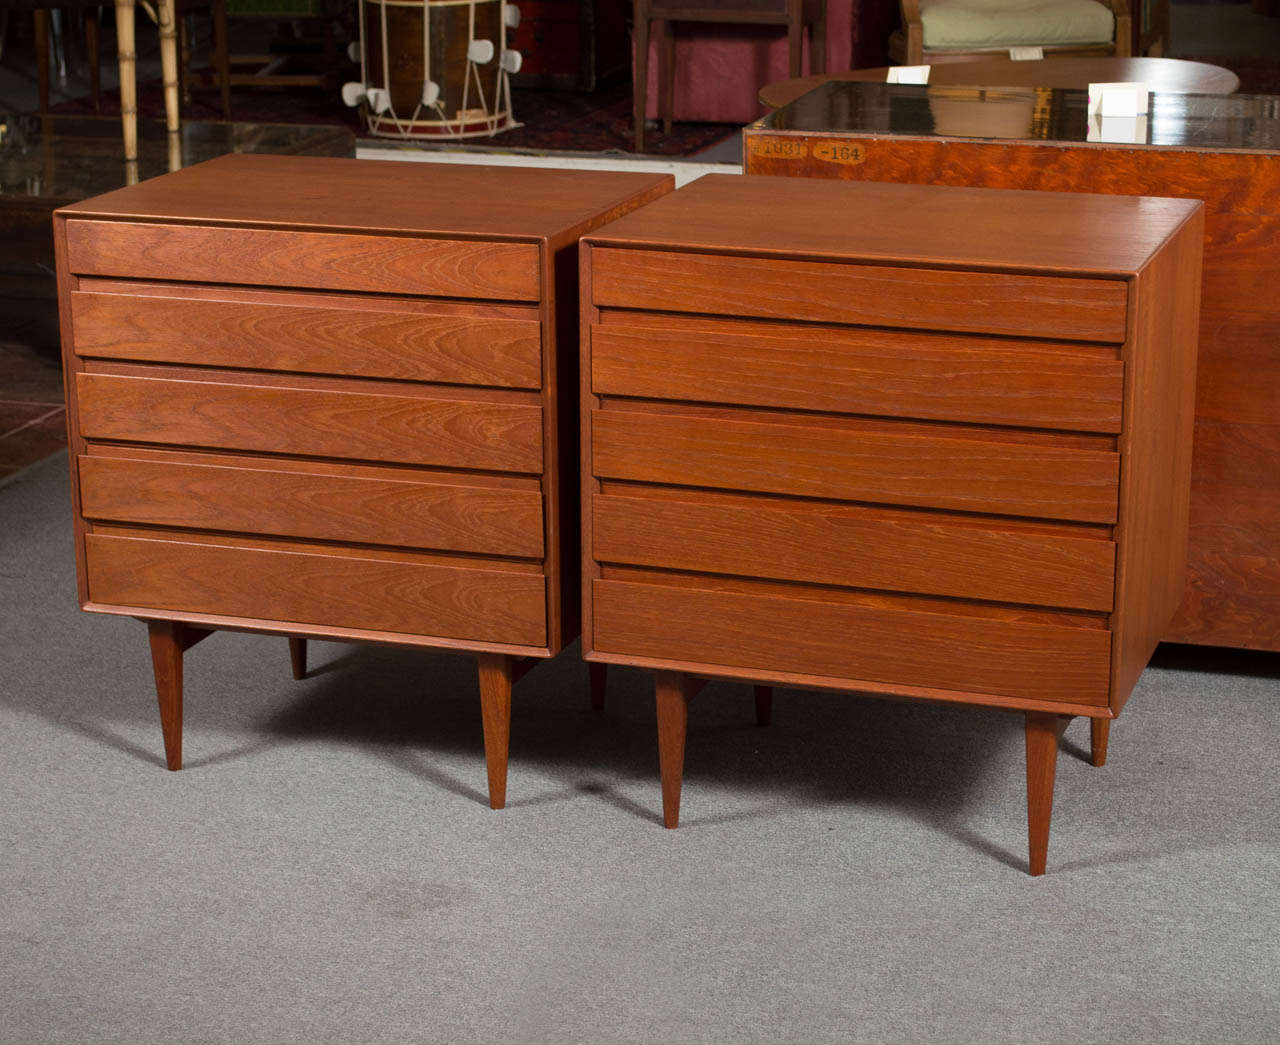 Offering a rare pair of teak Danish Modern bachelor chests designed by Henry Rosengren Hansen for Brande Mobelindustri .  The chests feature very nicely finished backs, discretely concealed drawer pulls, and five drawers each. The chests are branded